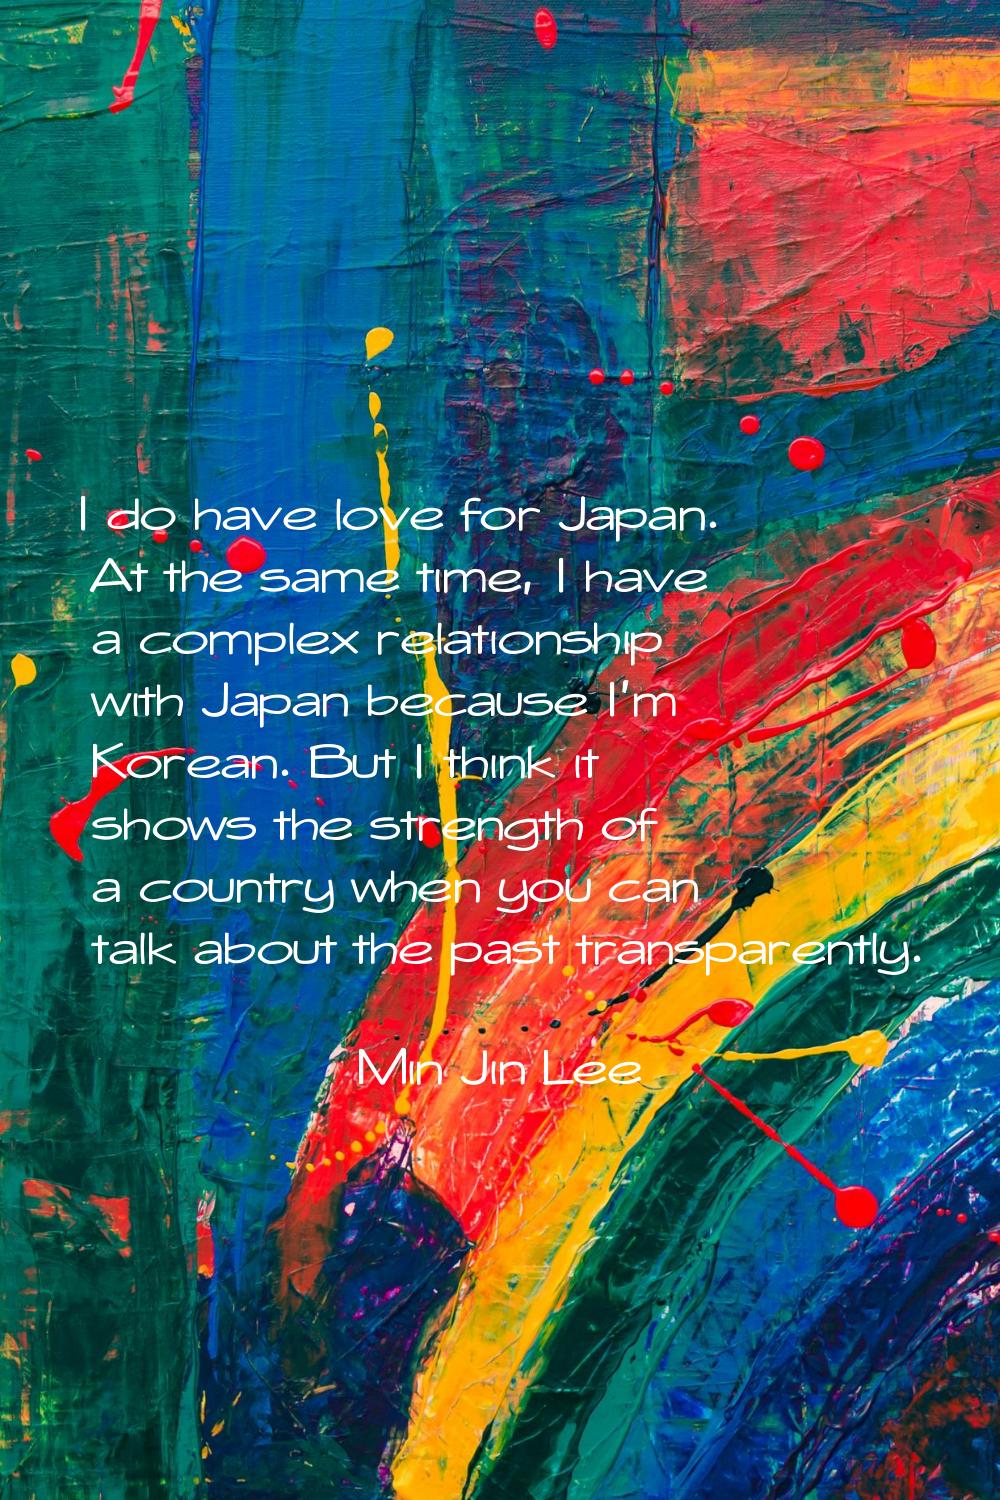 I do have love for Japan. At the same time, I have a complex relationship with Japan because I'm Ko